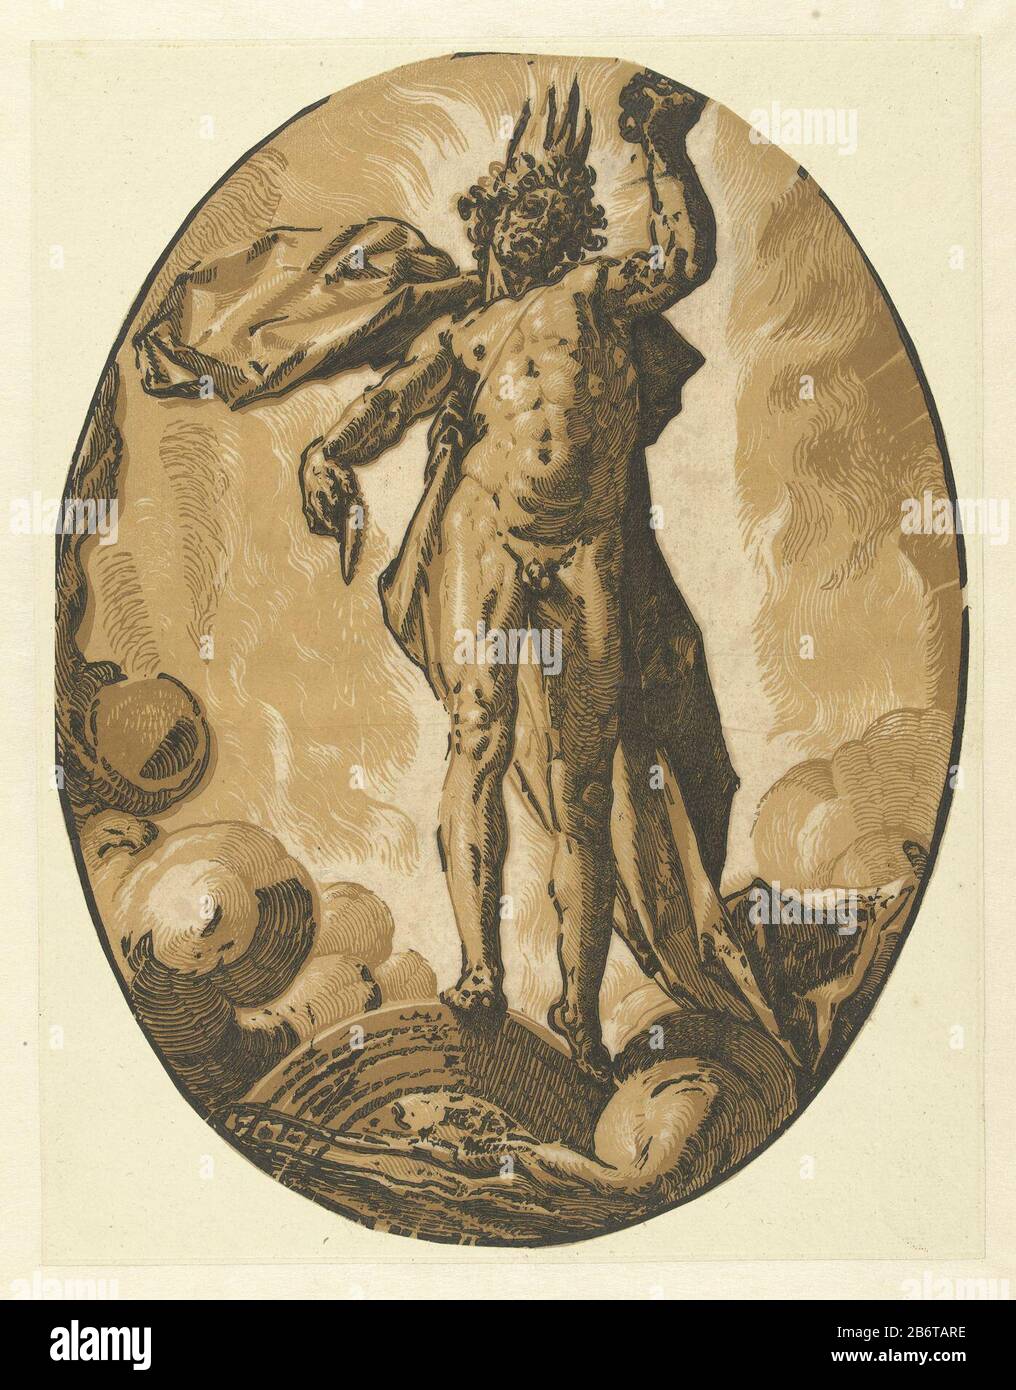 Helios (Dies) Goden en godinnen (serietitel) the god Helios or Dies (Day), between clouds standing on a rainbow, surrounded by flames. This print is part of a series of seven oval prints of classical gods and godinnen. Manufacturer : printmaker: Hendrick Goltzius (listed building) in its design: Hendrick Goltzius Publisher: Hendrick Goltzius Place manufacture: Haarlem Dating: 1588 - 1590 Physical features: chiaroscuro woodcut; line block with tone block in ocher and tone block in brown material: paper Technique: light and dark-woodblock dimensions: image: h 348 mm × W 267 mm Subject: Apollo sh Stock Photo